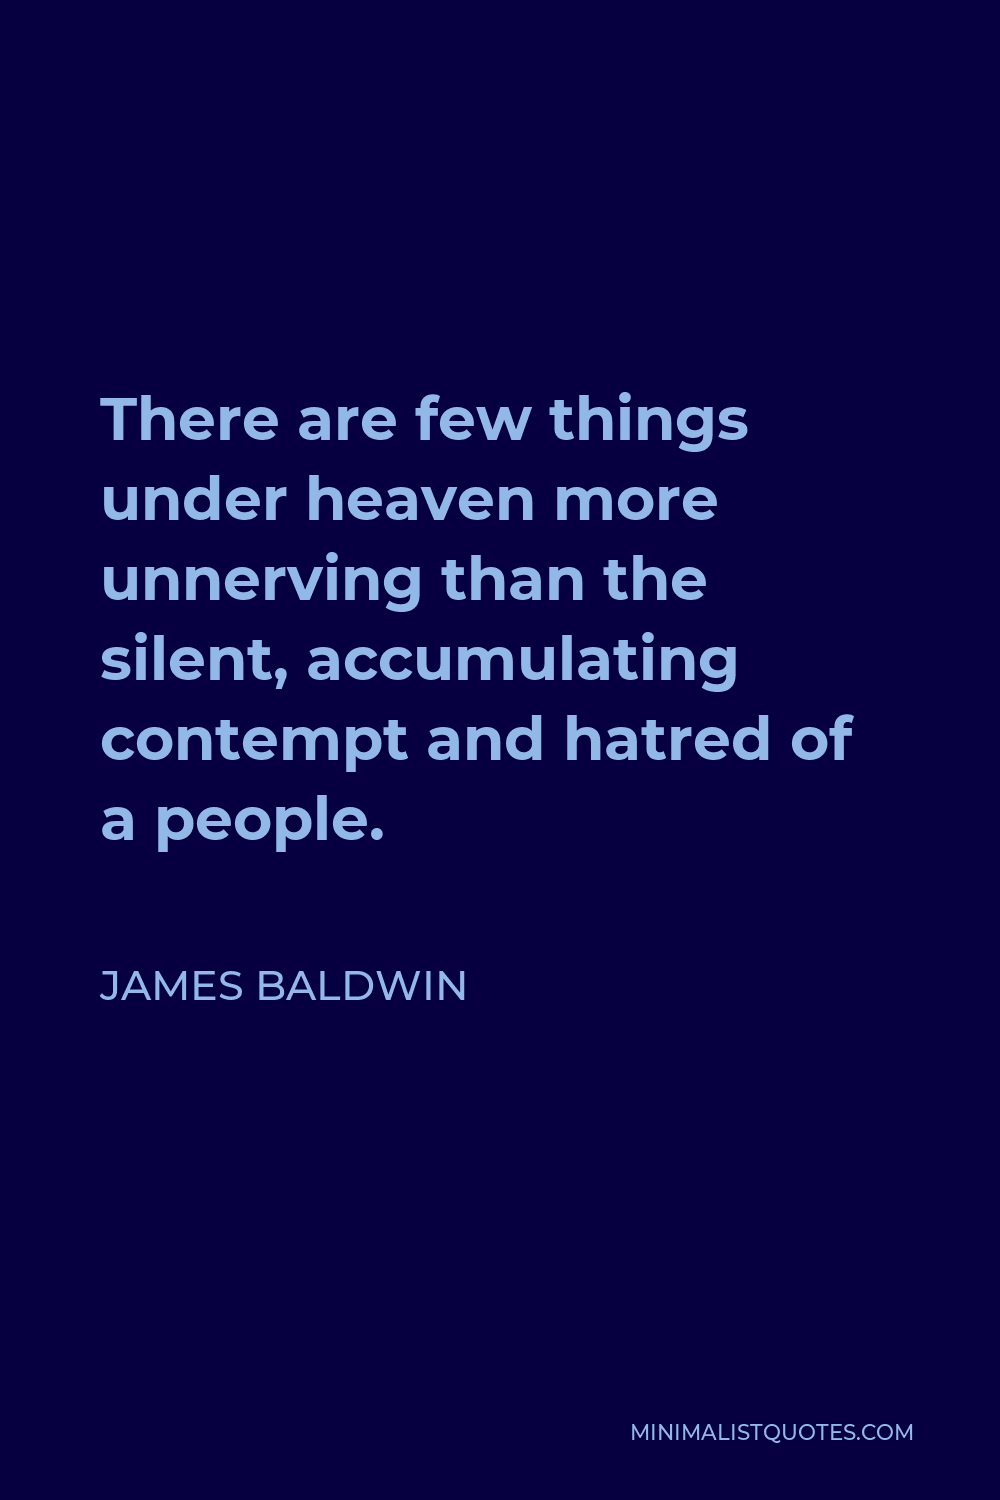 James Baldwin Quote - There are few things under heaven more unnerving than the silent, accumulating contempt and hatred of a people.